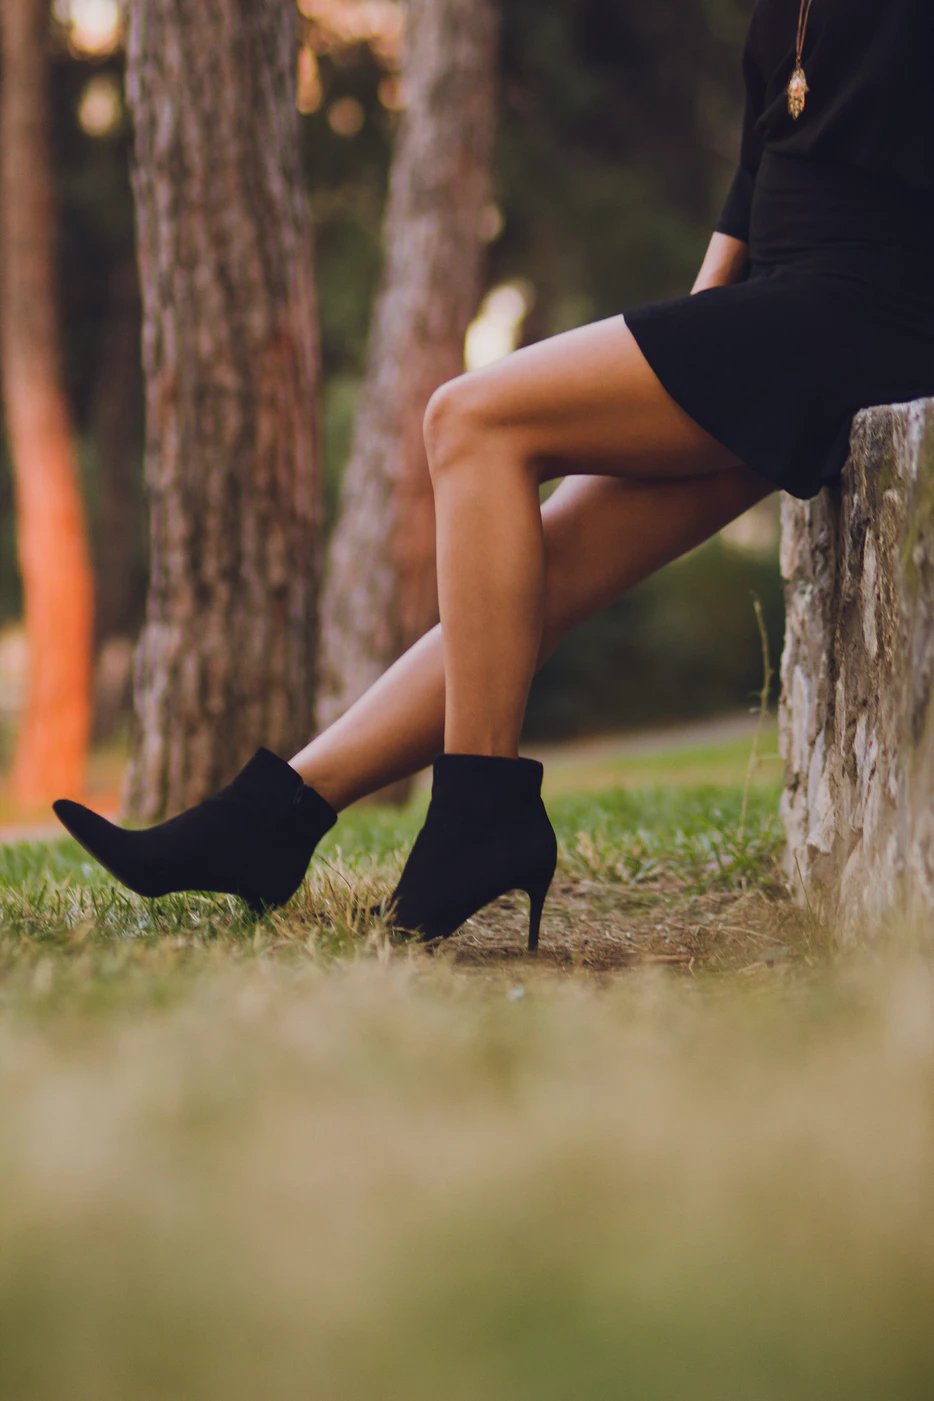 Permanent Hair Removal: 3 Ways To Get Rid Of Pesky Leg Hair Forever - Kenzzi